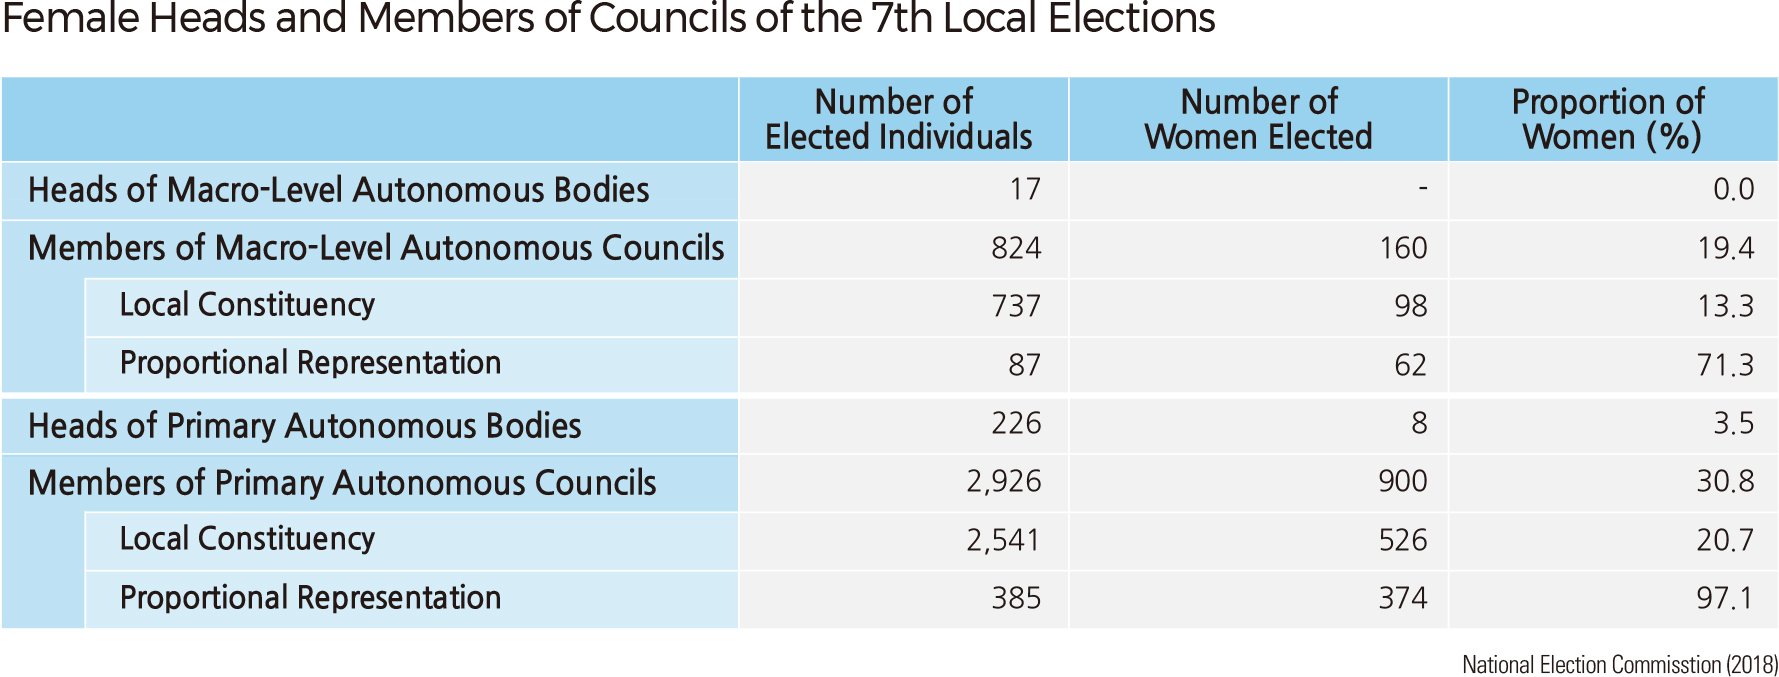 Female Heads and Members of Councils of the 7th Local Elections